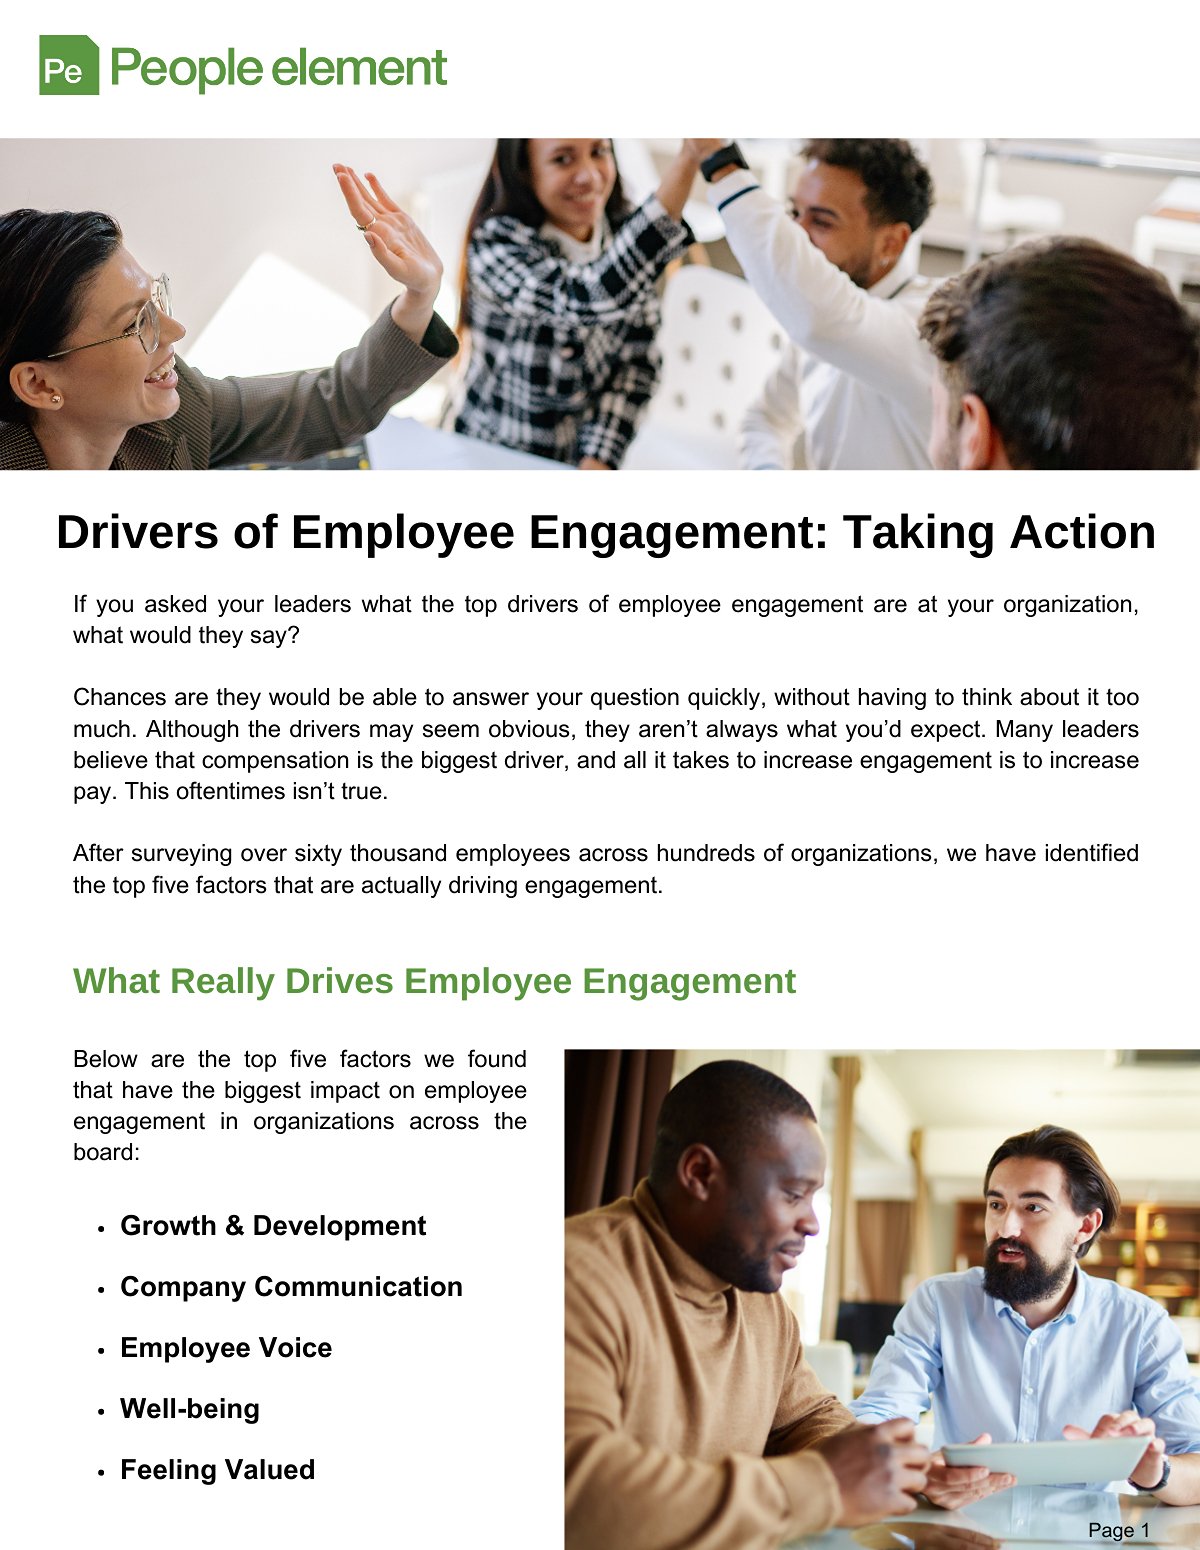 Top 5 Drivers of Employee Engagement